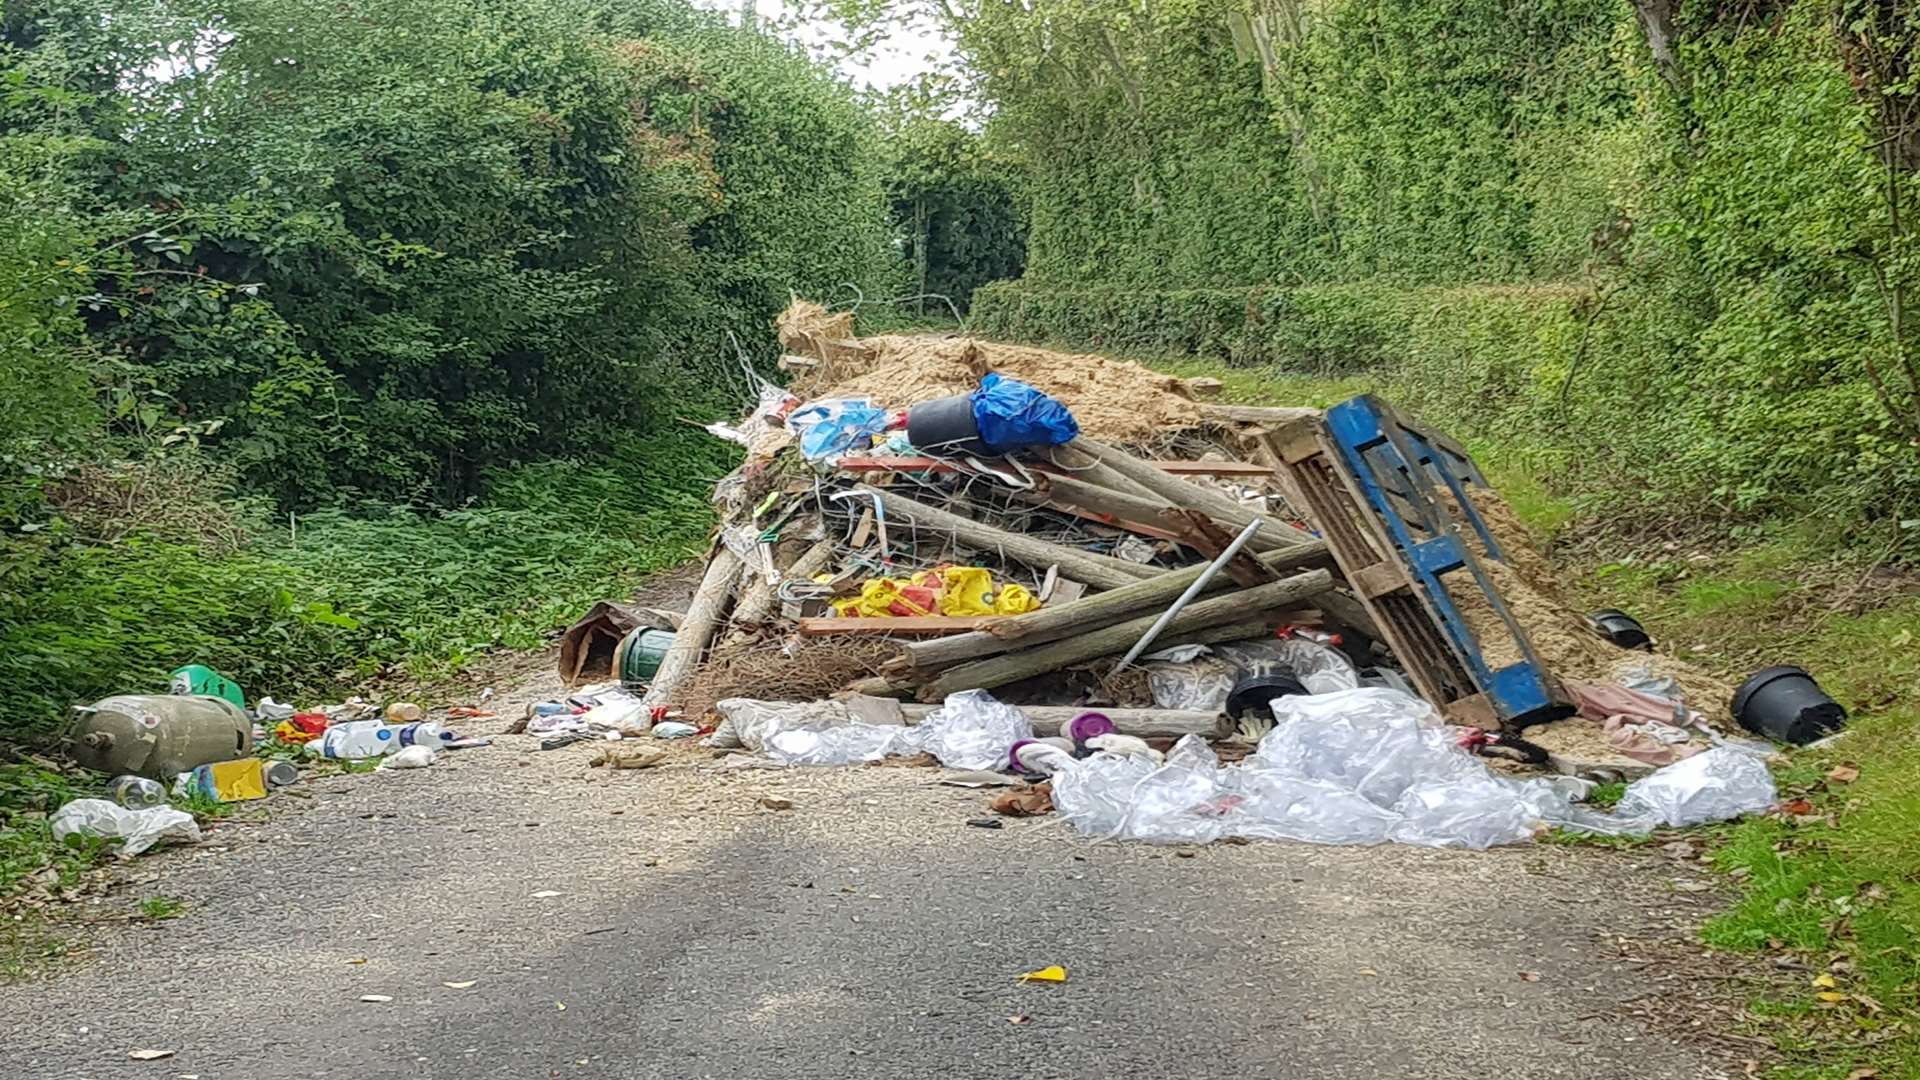 Fly-tipping in Susans Lane, Upchurch. Picture: Graeme Archer.